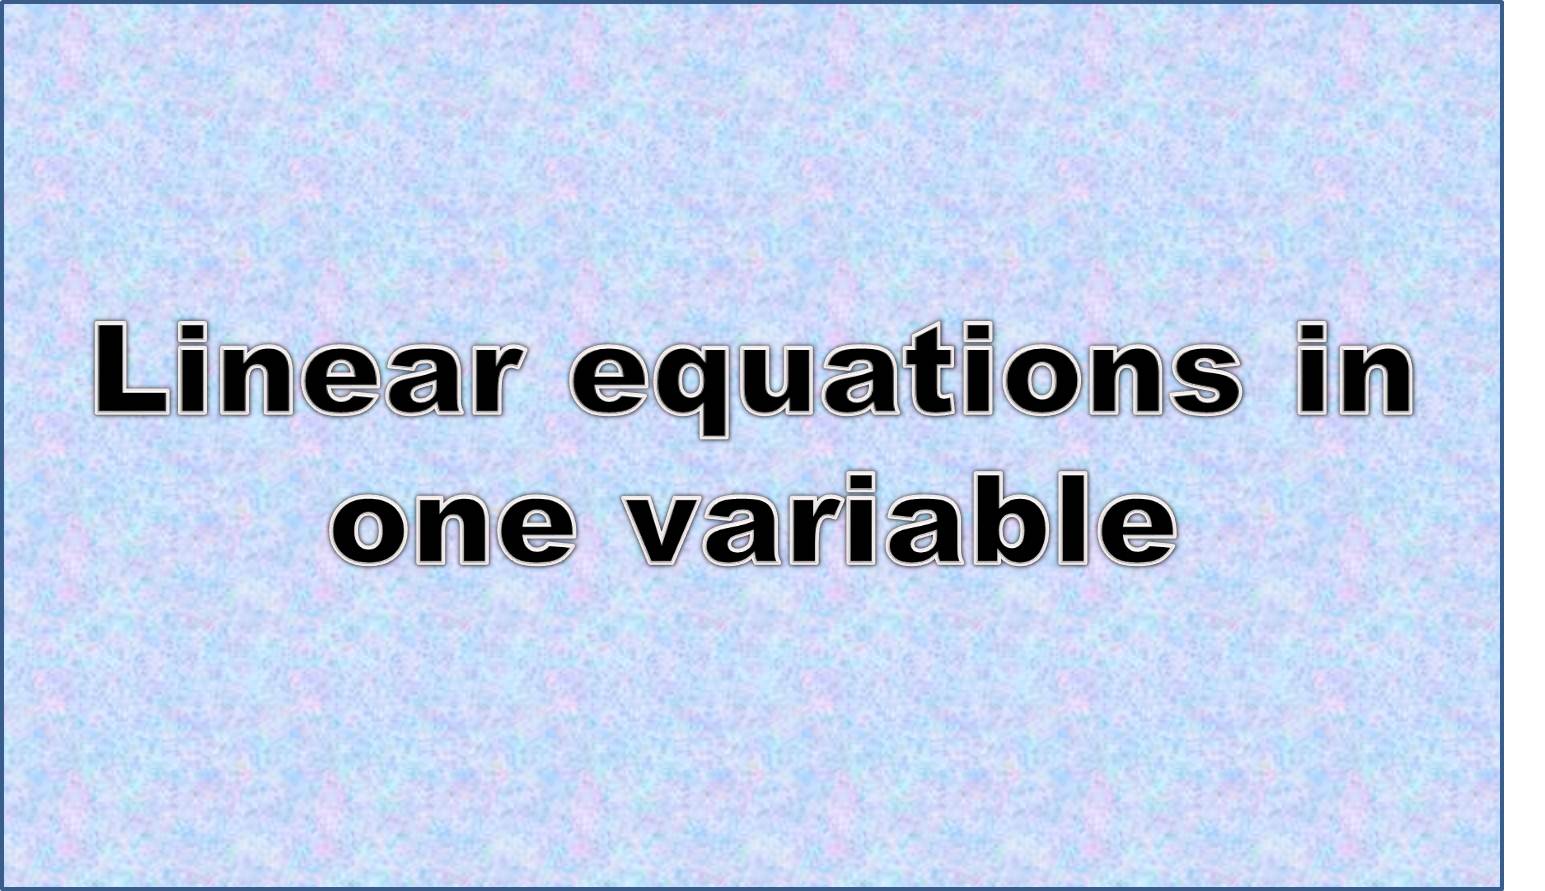 http://study.aisectonline.com/images/Testing solutions to equations.jpg